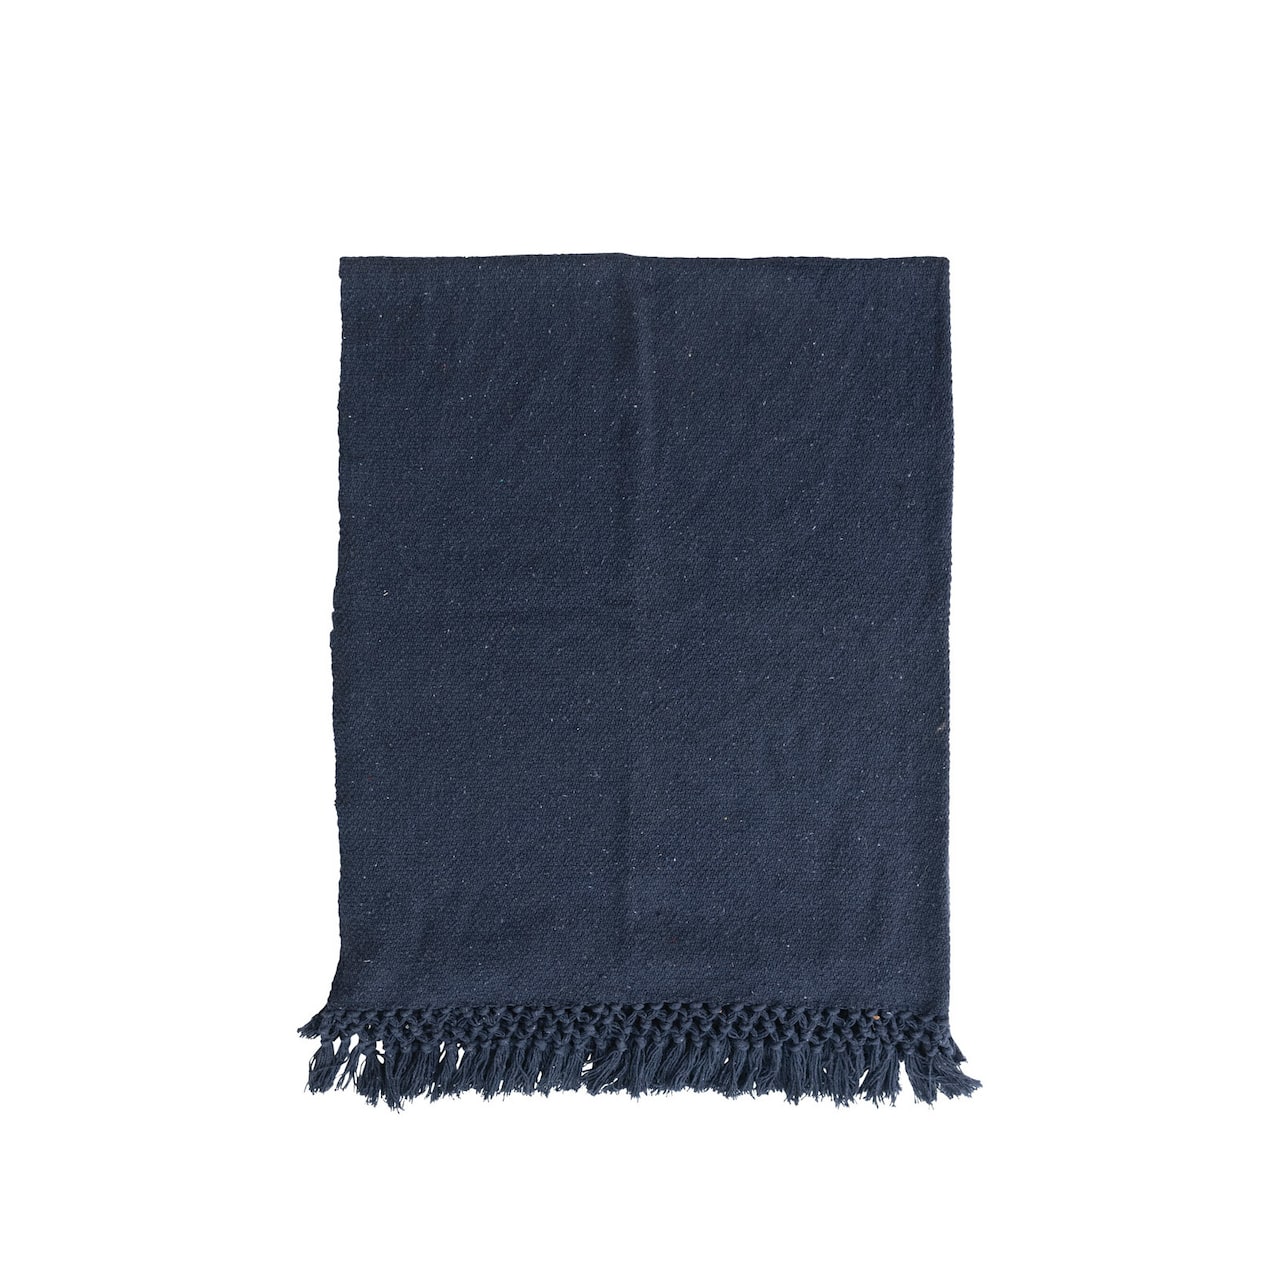 Navy Woven Recycled Cotton Blend Throw with Crochet Fringe